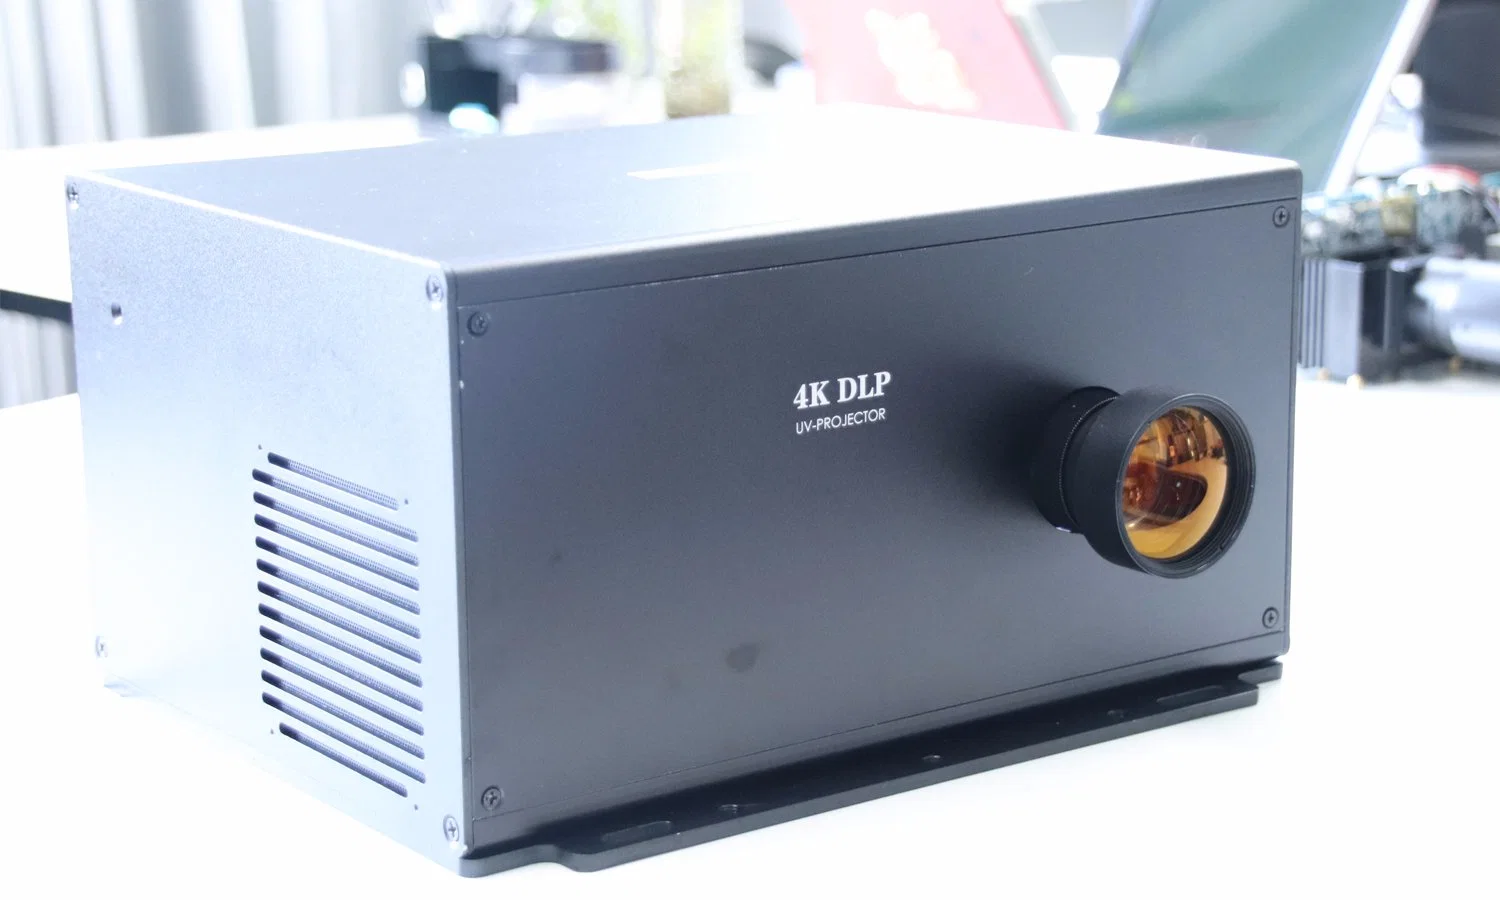 Zs Factory 405nm LED Light Industrial Laser Projector for Ceramic Printer